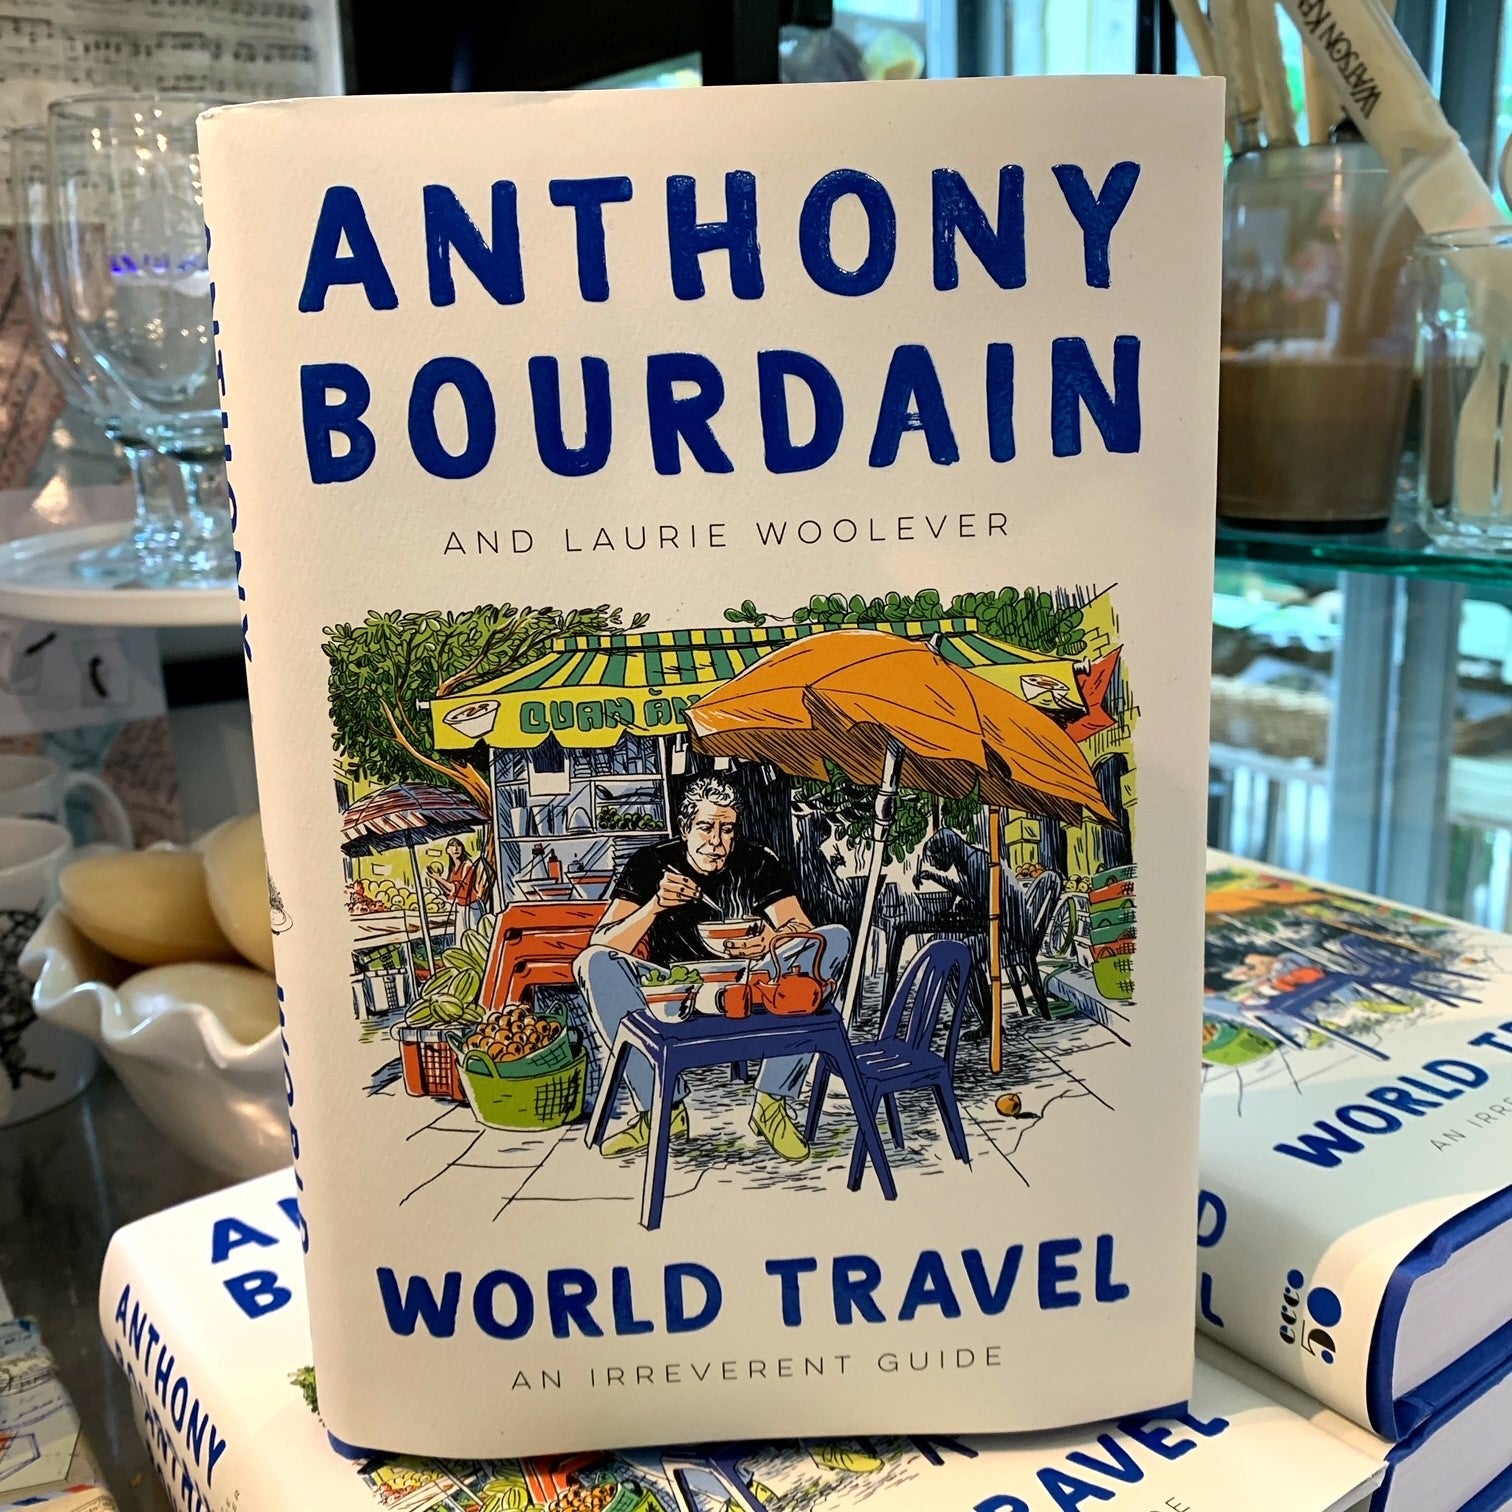 World Travel: An Irreverent Guide by Anthony Bourdain